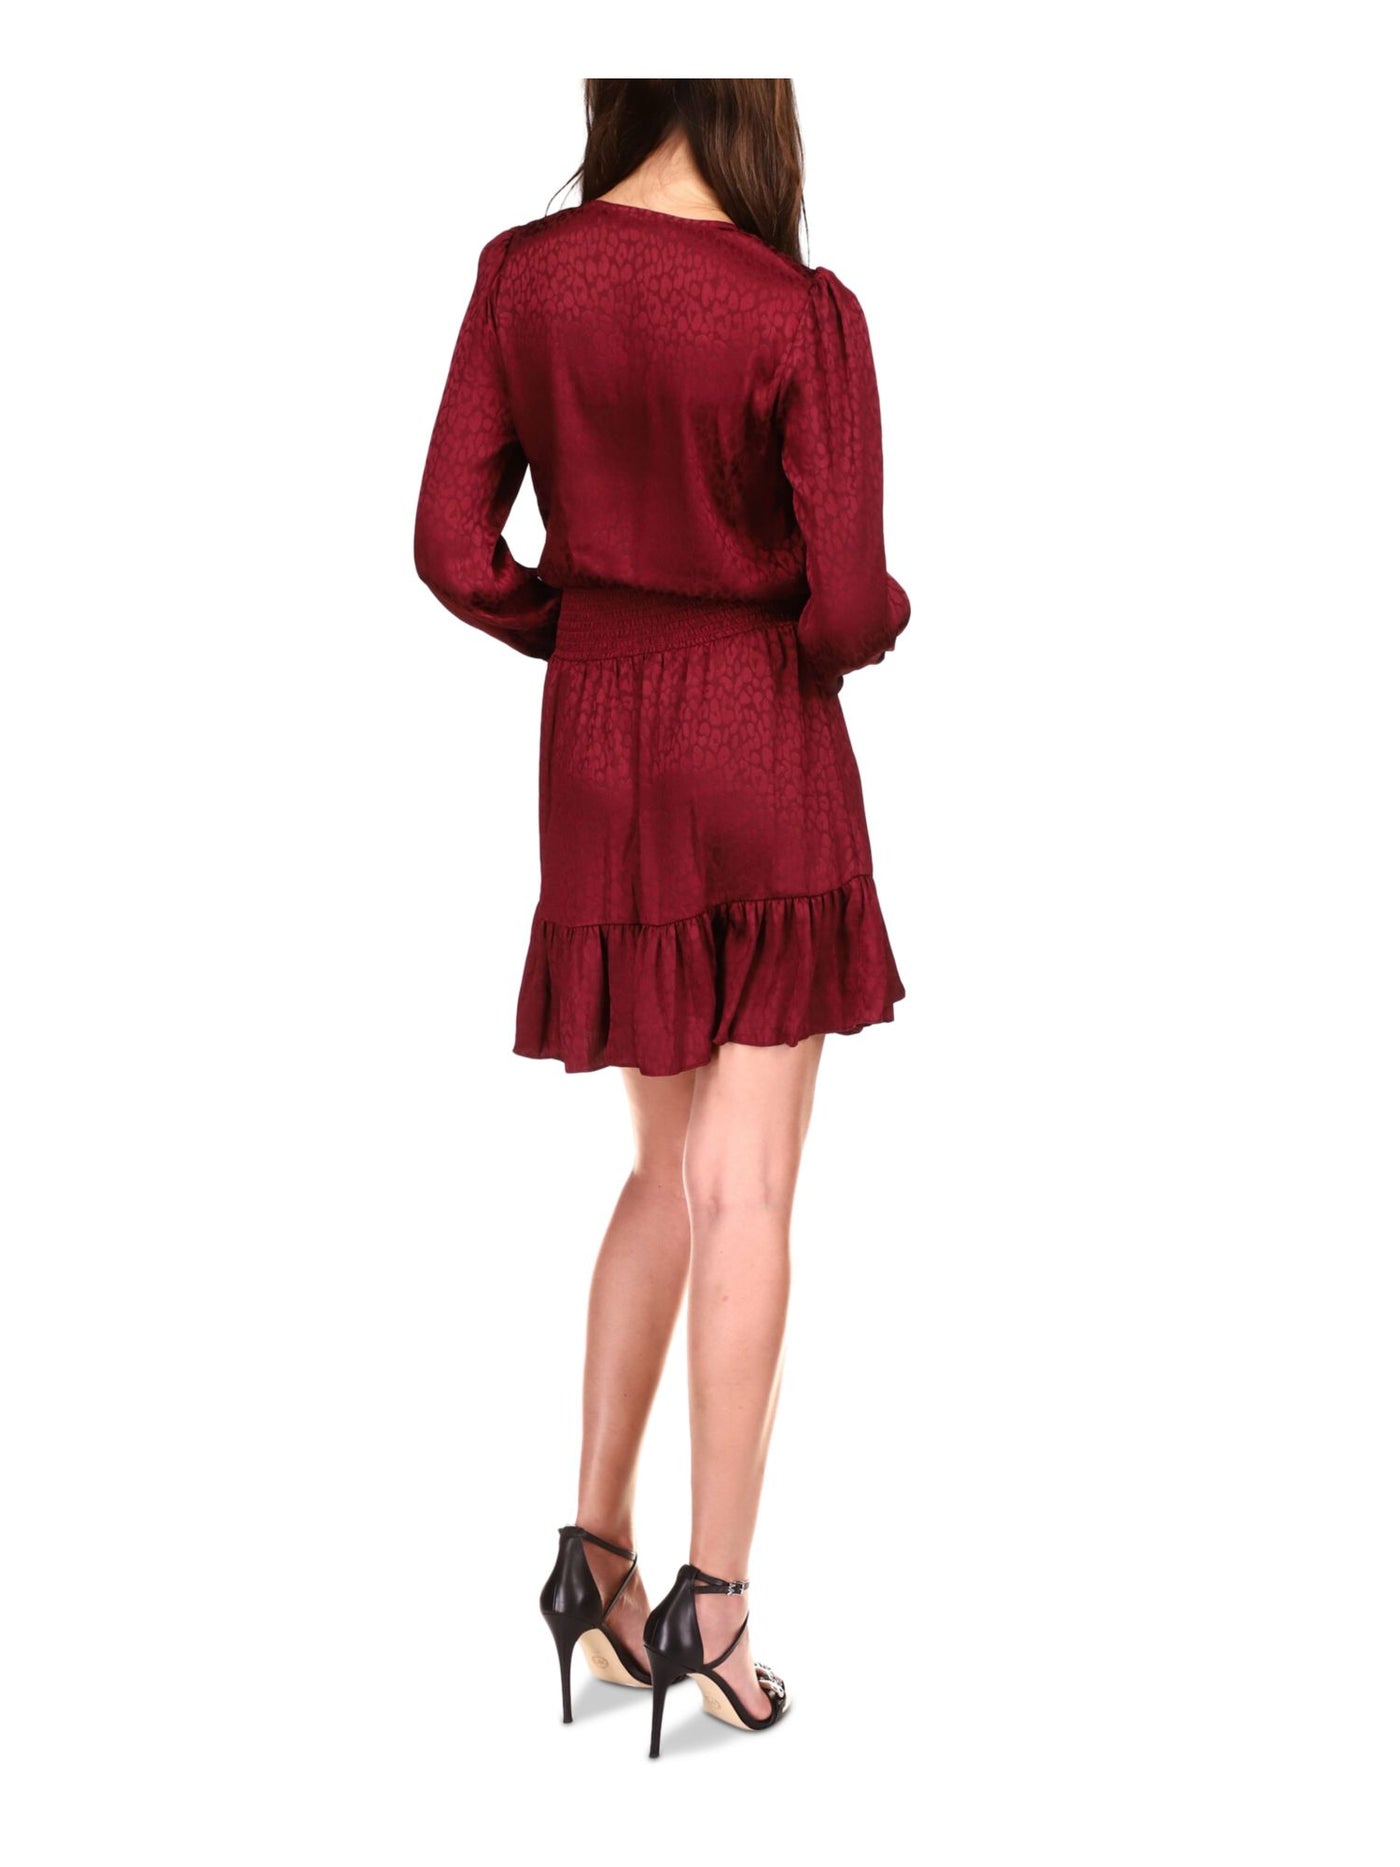 MICHAEL MICHAEL KORS Womens Maroon Smocked Ruffled Cuffed Pull-on Style Long Sleeve V Neck Above The Knee Cocktail Faux Wrap Dress XXS